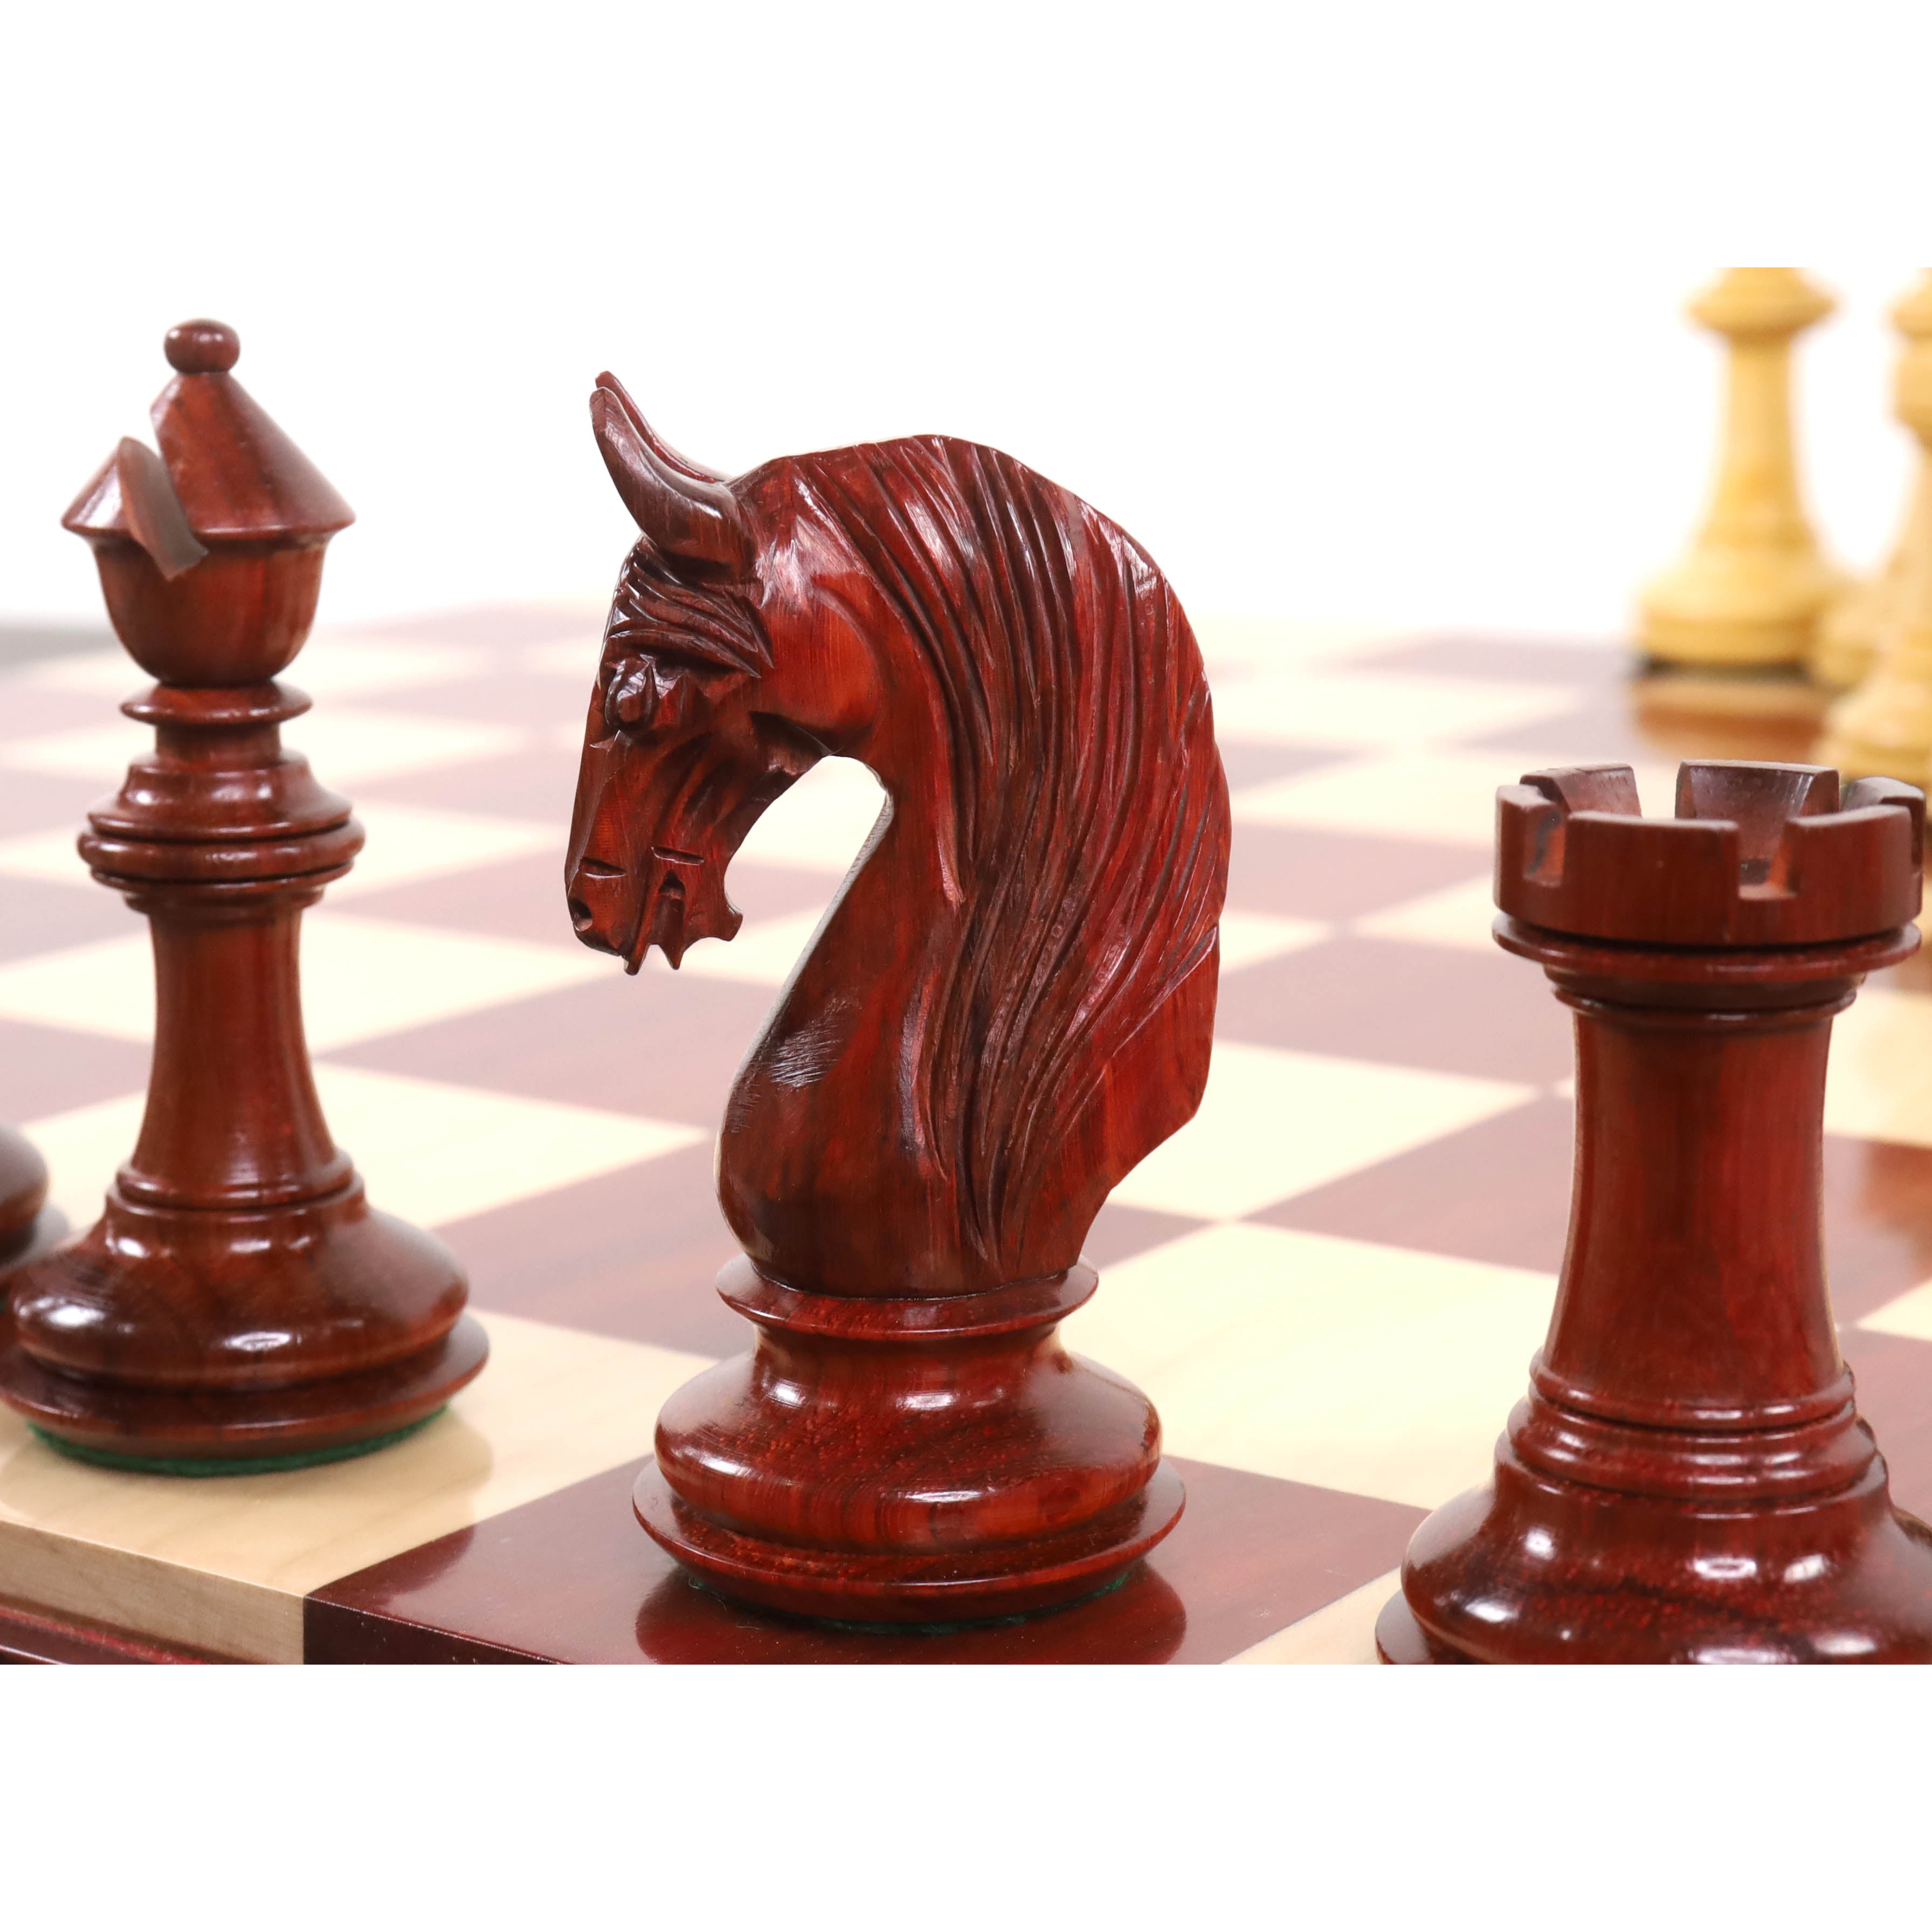 Combo of 4.6" Bath Luxury Staunton Chess Set - Pieces in Bud Rosewood with Board and Box